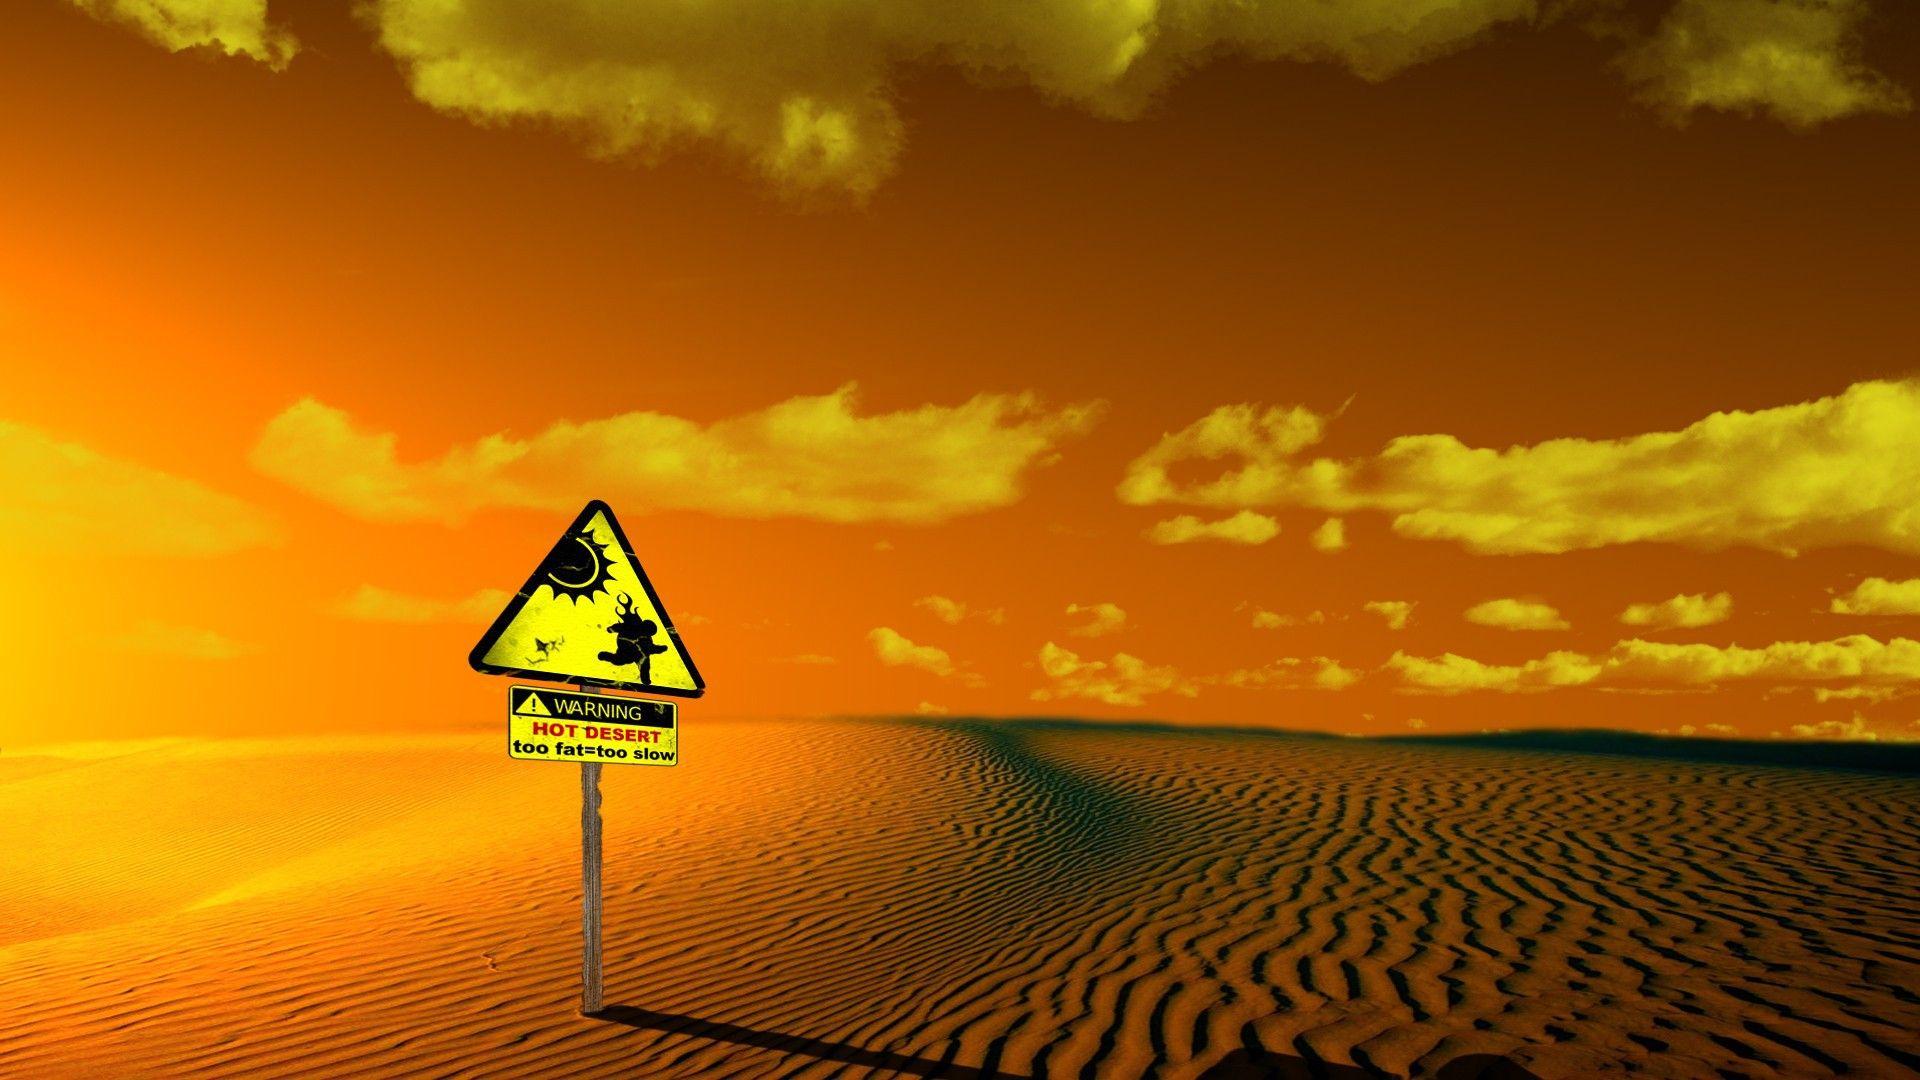 Caution, hot desert, sign wallpaper and image